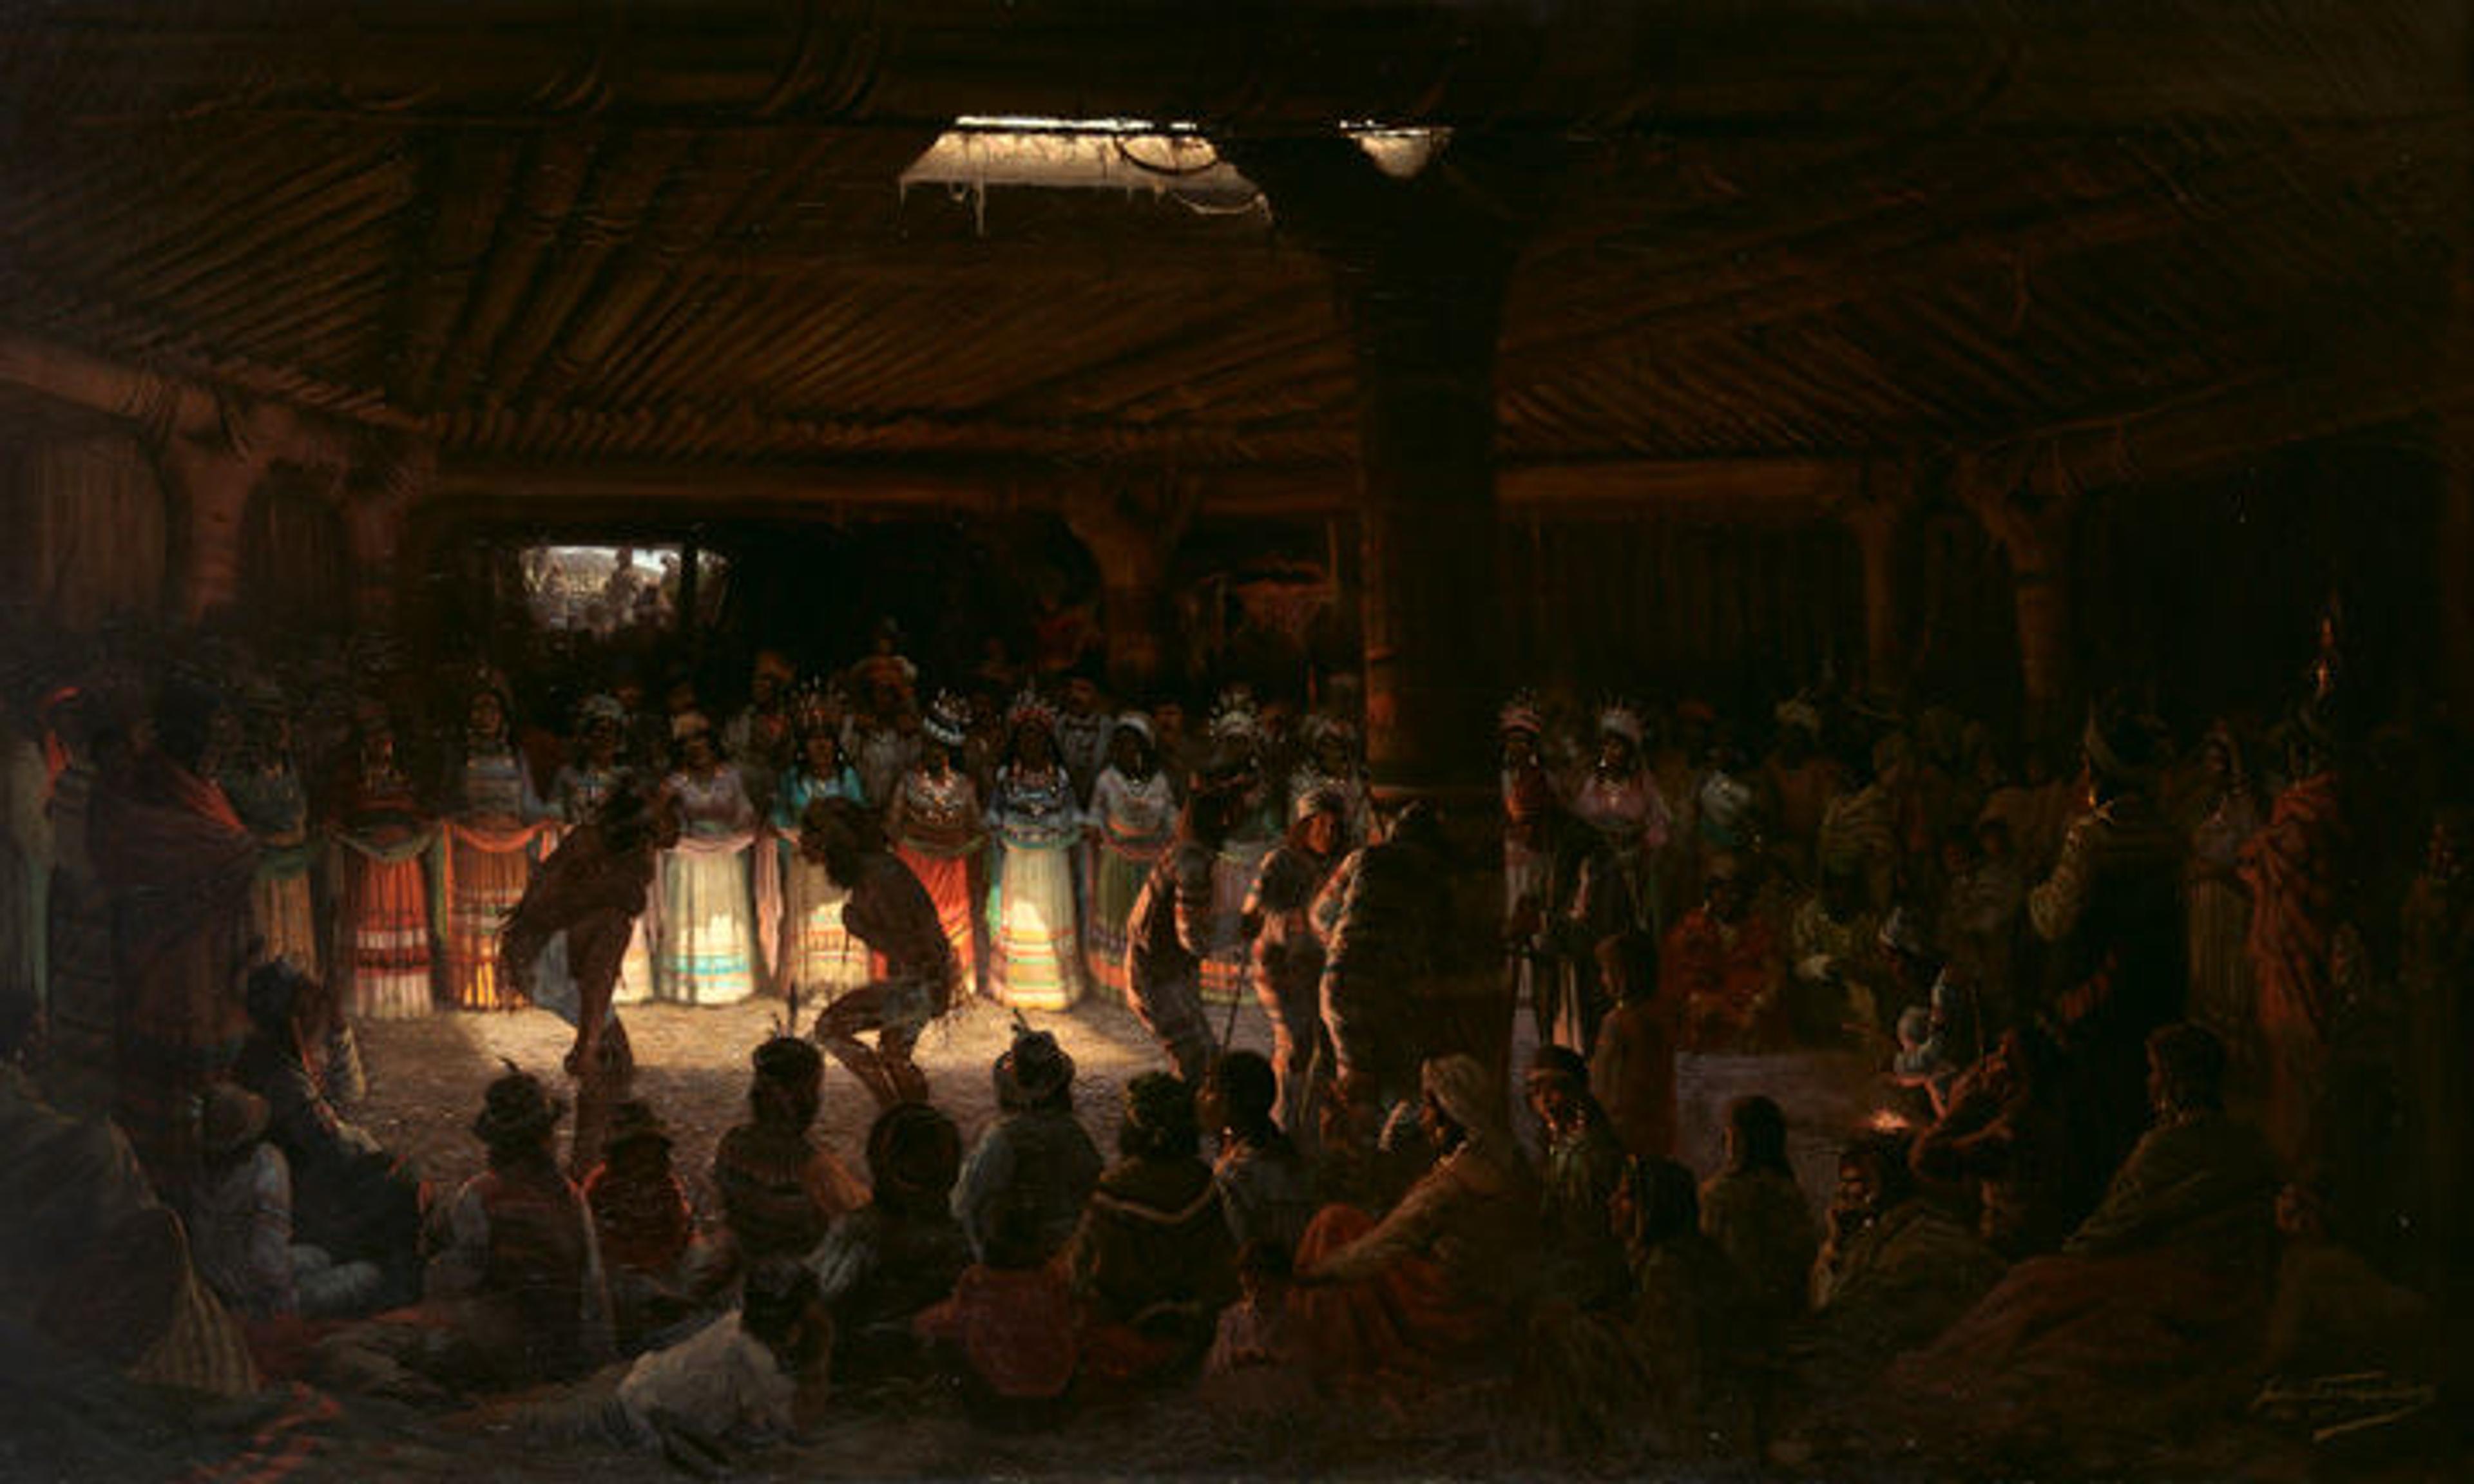 Jules Tavernier paintings of nearly 100 figures watching members of the Pomo Indian tribe act out a coming-of-age ritual